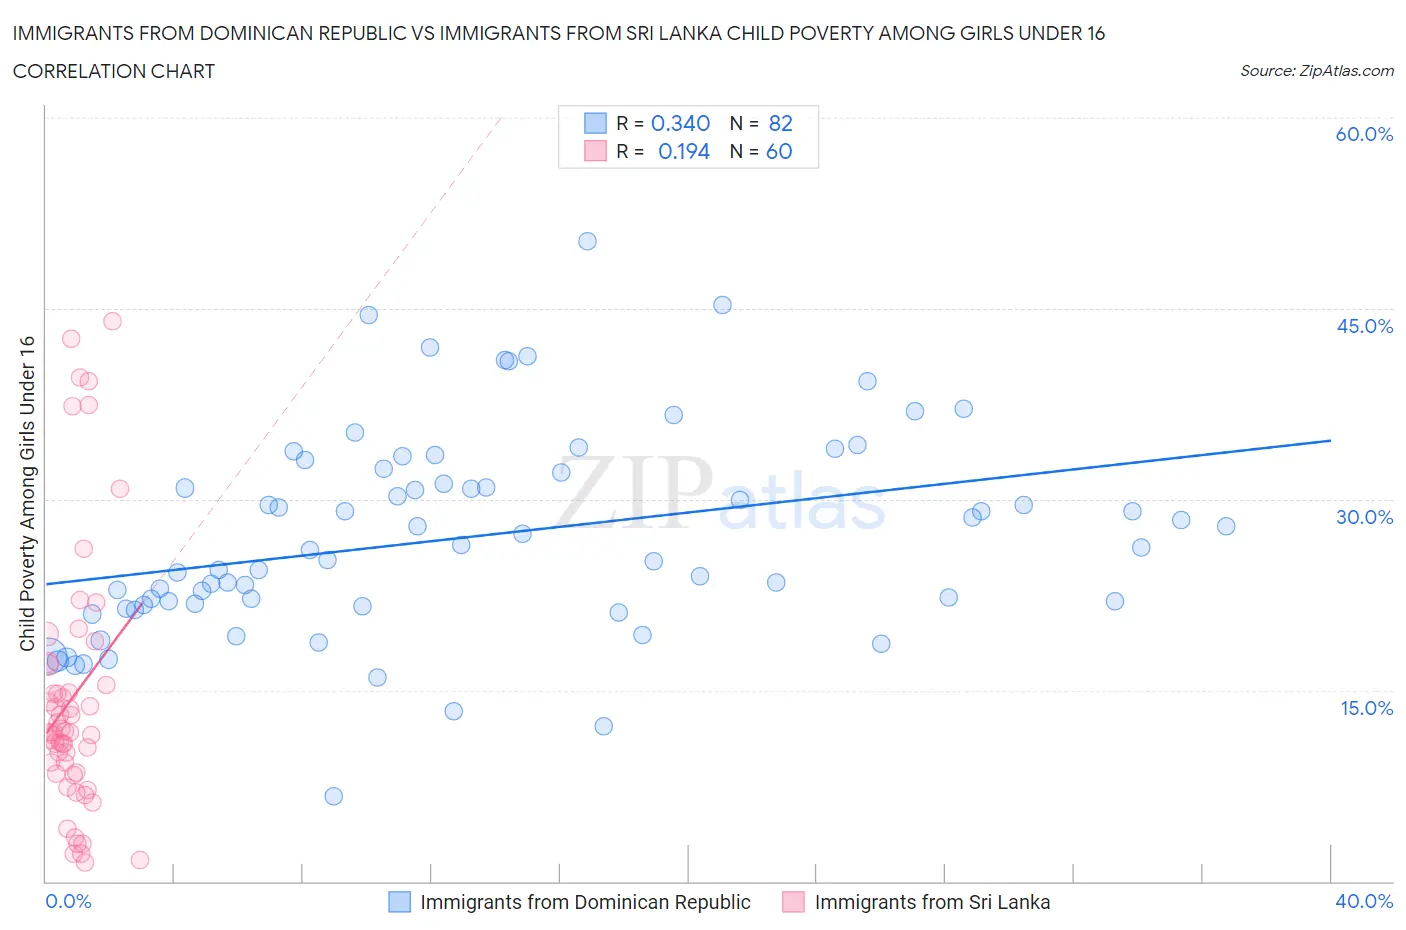 Immigrants from Dominican Republic vs Immigrants from Sri Lanka Child Poverty Among Girls Under 16